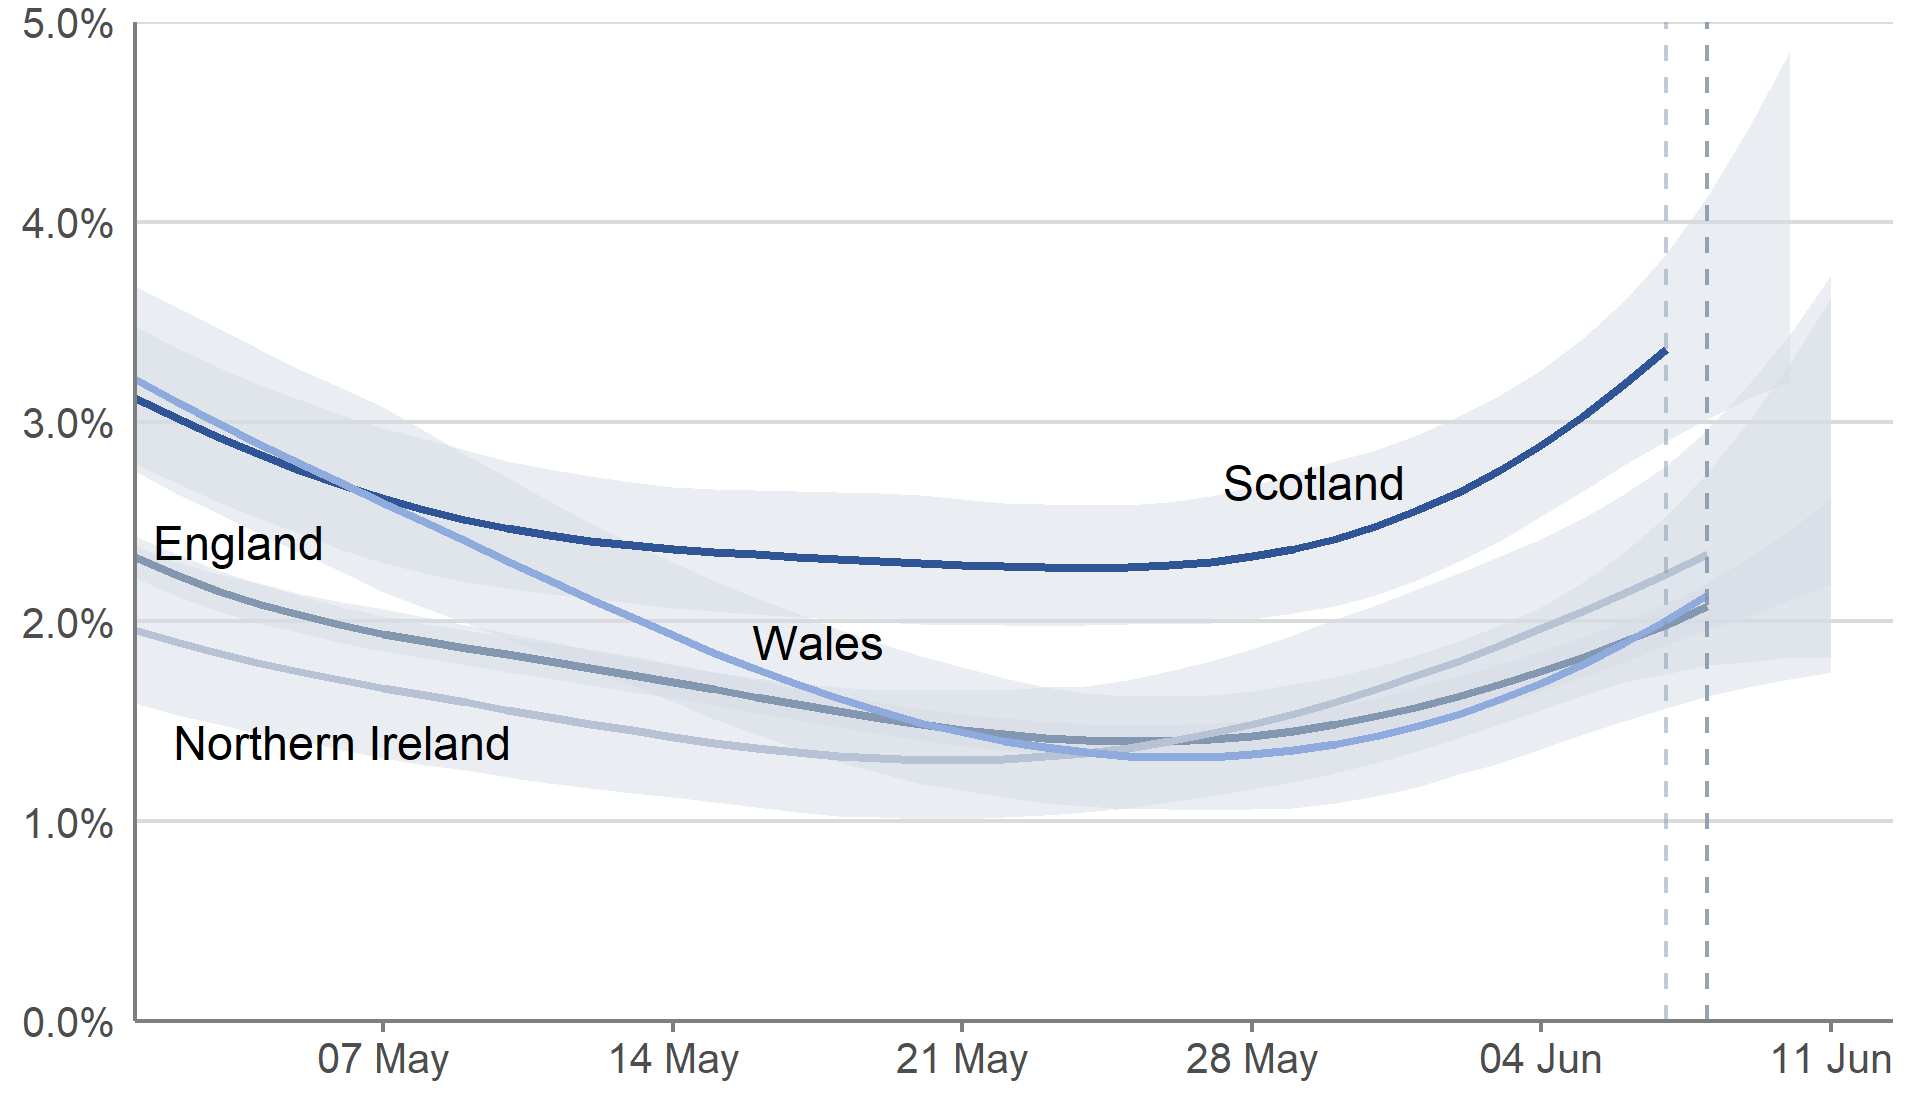 A line chart showing modelled daily estimates of the percentage of the population testing positive for COVID-19 in each of the four nations of the UK, between 1 May and 10 June 2022 for Scotland, and 1 May and 11 June for England, Wales and Northern Ireland. Modelled daily estimates are represented by four lines with 95% credible intervals in pale blue shading. The lines are dark blue for Scotland, light blue for Wales, dark grey for England and light grey for Northern Ireland. A vertical dashed line near the end of the series indicating greater uncertainty in estimates for the last three reported days. In the most recent week, (4 to 10 June 2022 for Scotland, 5 to 11 June for England, Wales and Northern Ireland), the estimated percentage of people testing positive for COVID-19 increased in all four nations.